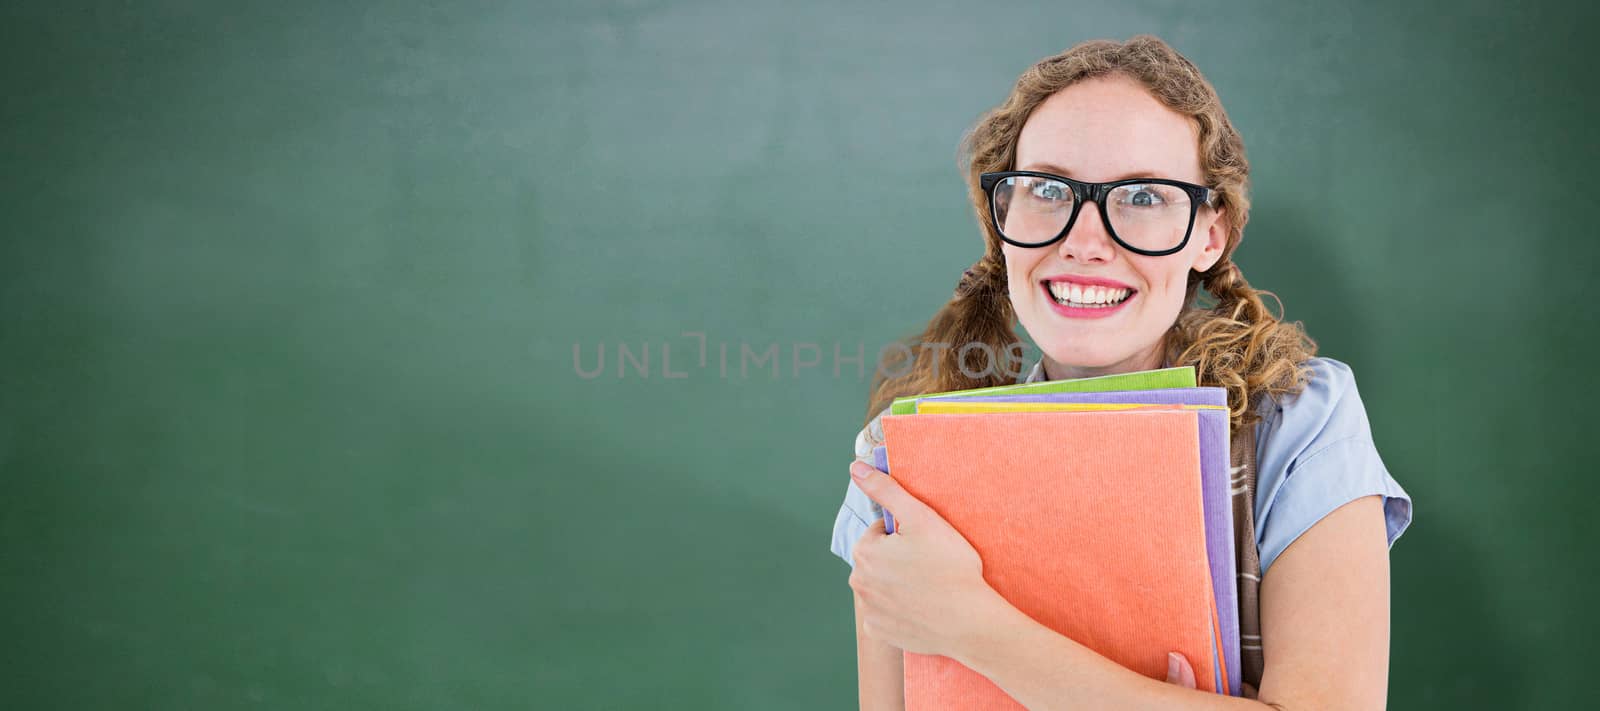 Geeky hipster woman holding files  against green chalkboard